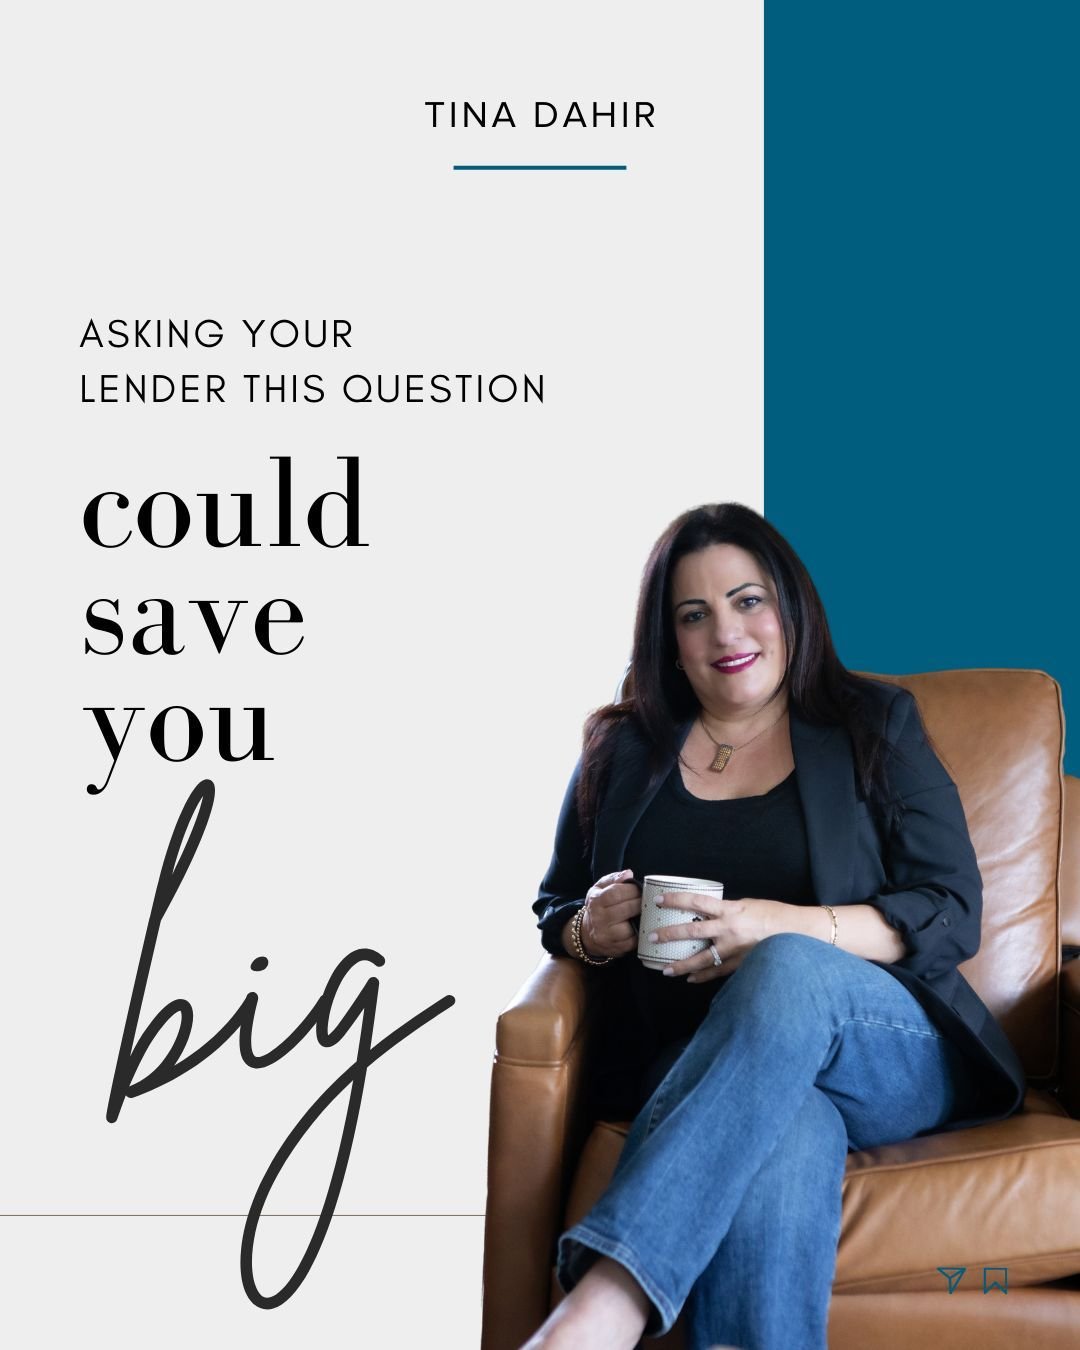 Asking your lender this ONE question could save you big. ⁠
Does my loan have a pre-payment penalty?⁠
⁠
Making just ONE extra payment each year can shave years off your mortgage term and save you thousands in interest.⁠
⁠
Let&rsquo;s look at a client 